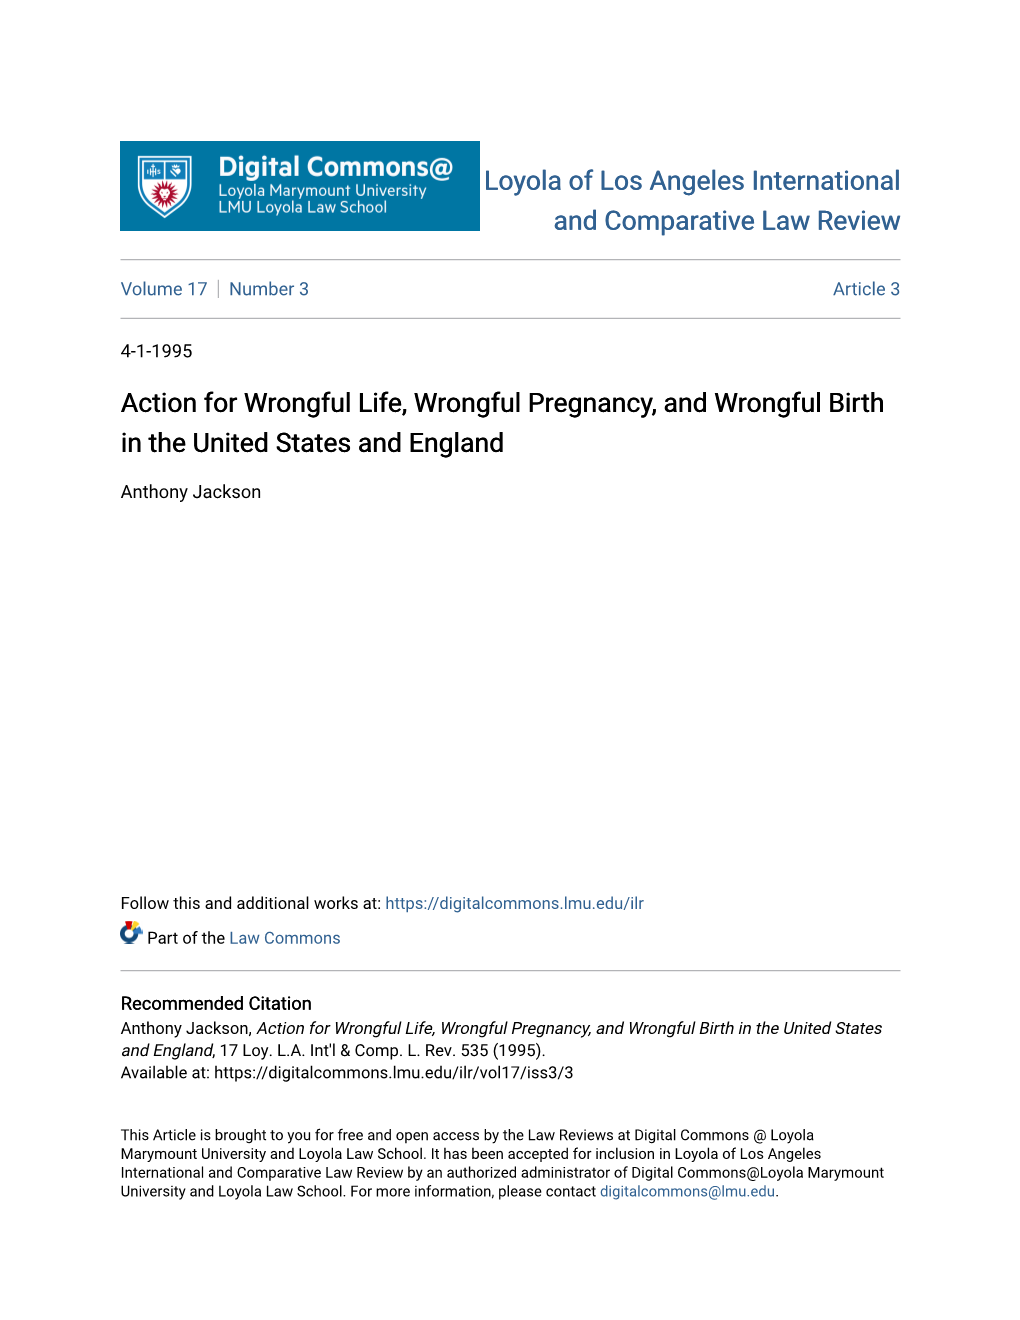 Wrongful Life, Wrongful Pregnancy, and Wrongful Birth in the United States and England